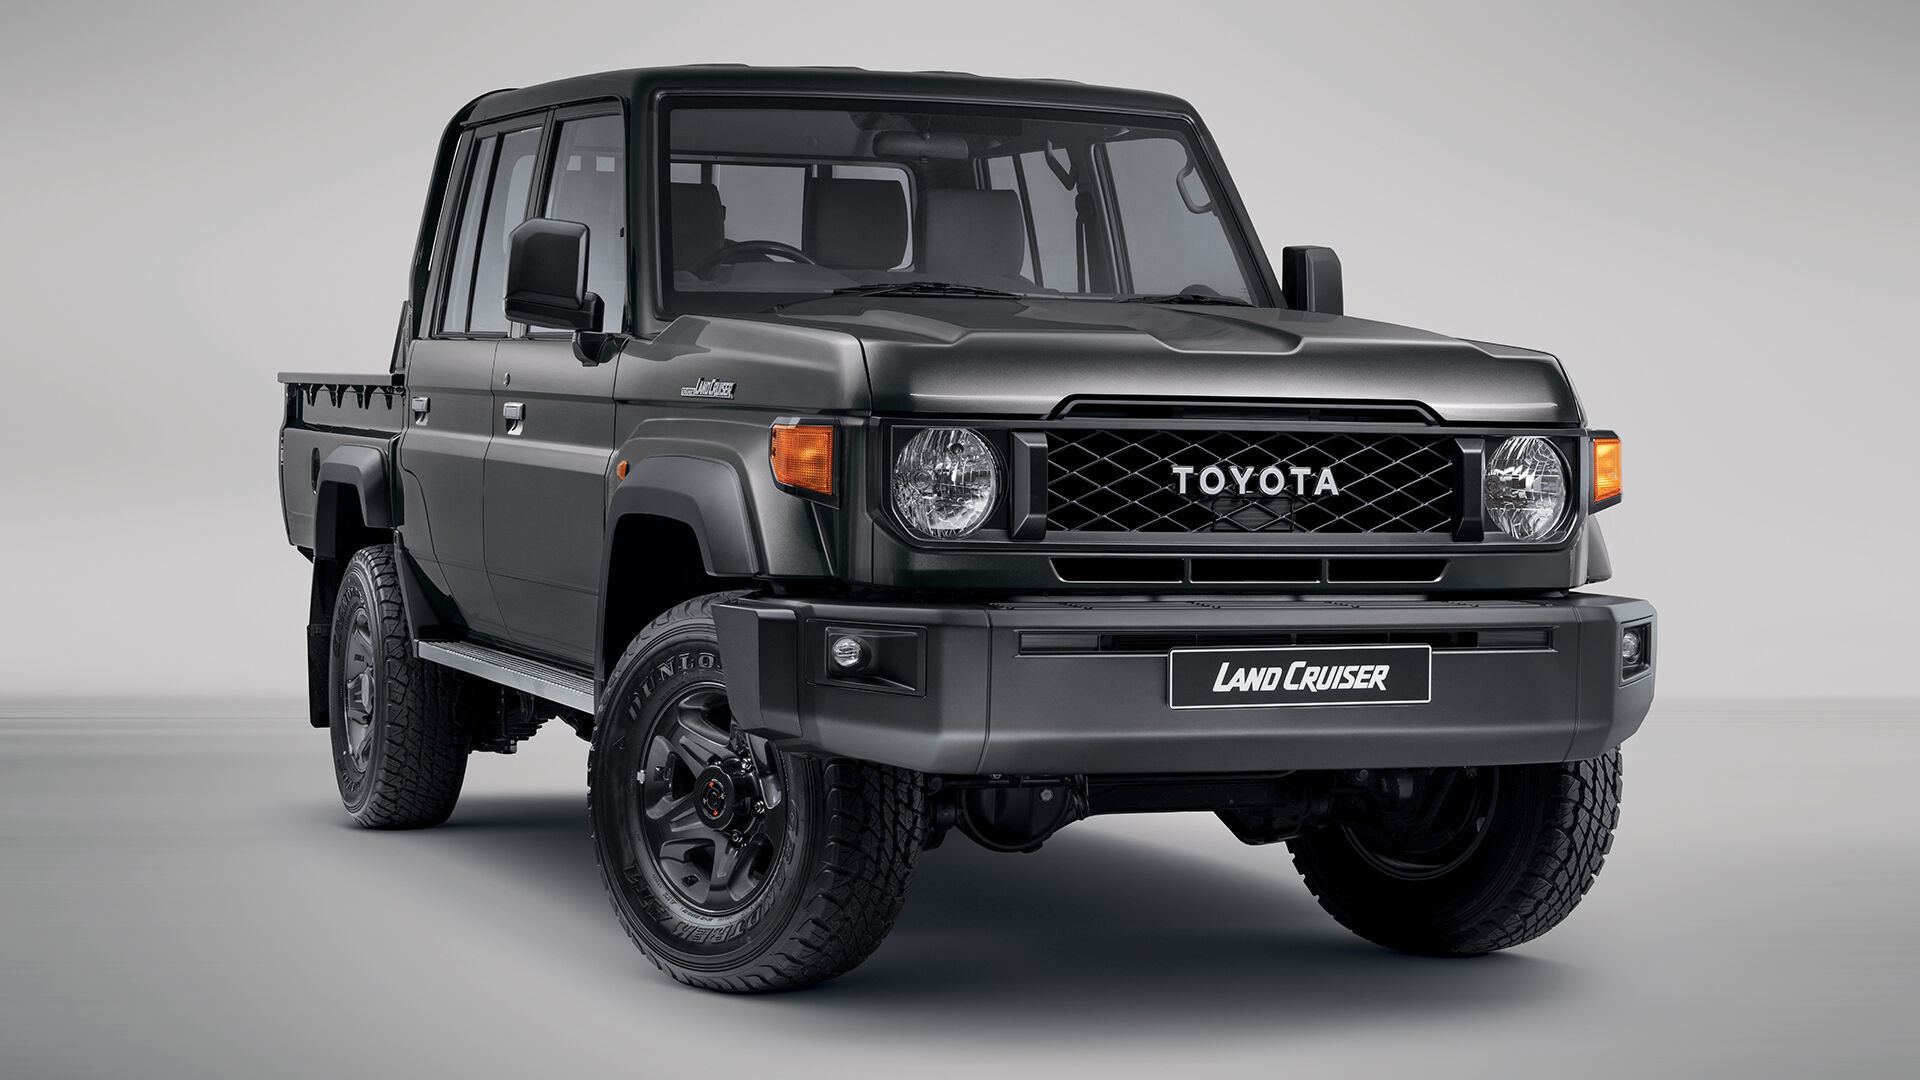 Toyota Celebrates Land Cruiser's 70th With Retro Truck - The Car Guide